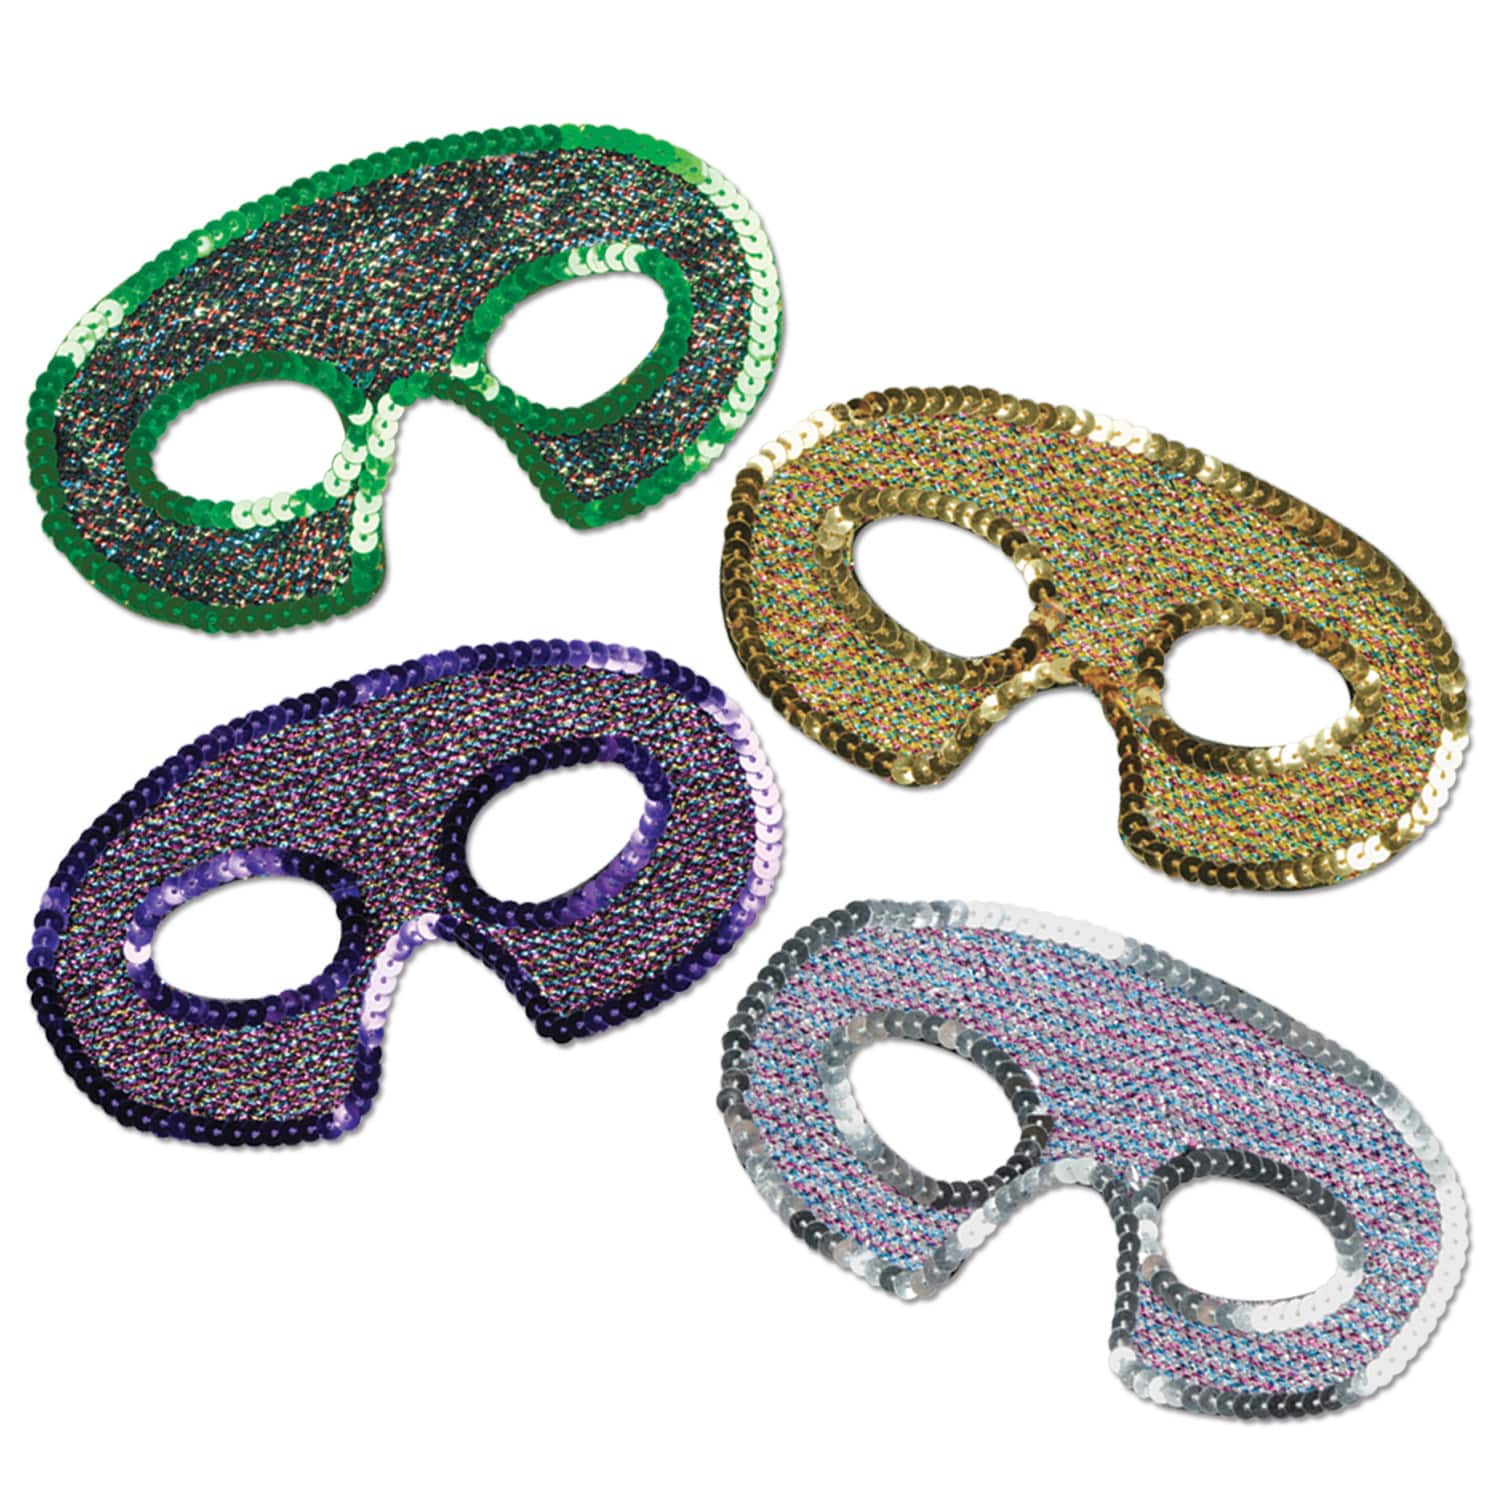 beautiful sequined half masks in green, gold, purple, and silver that cover just the eyes